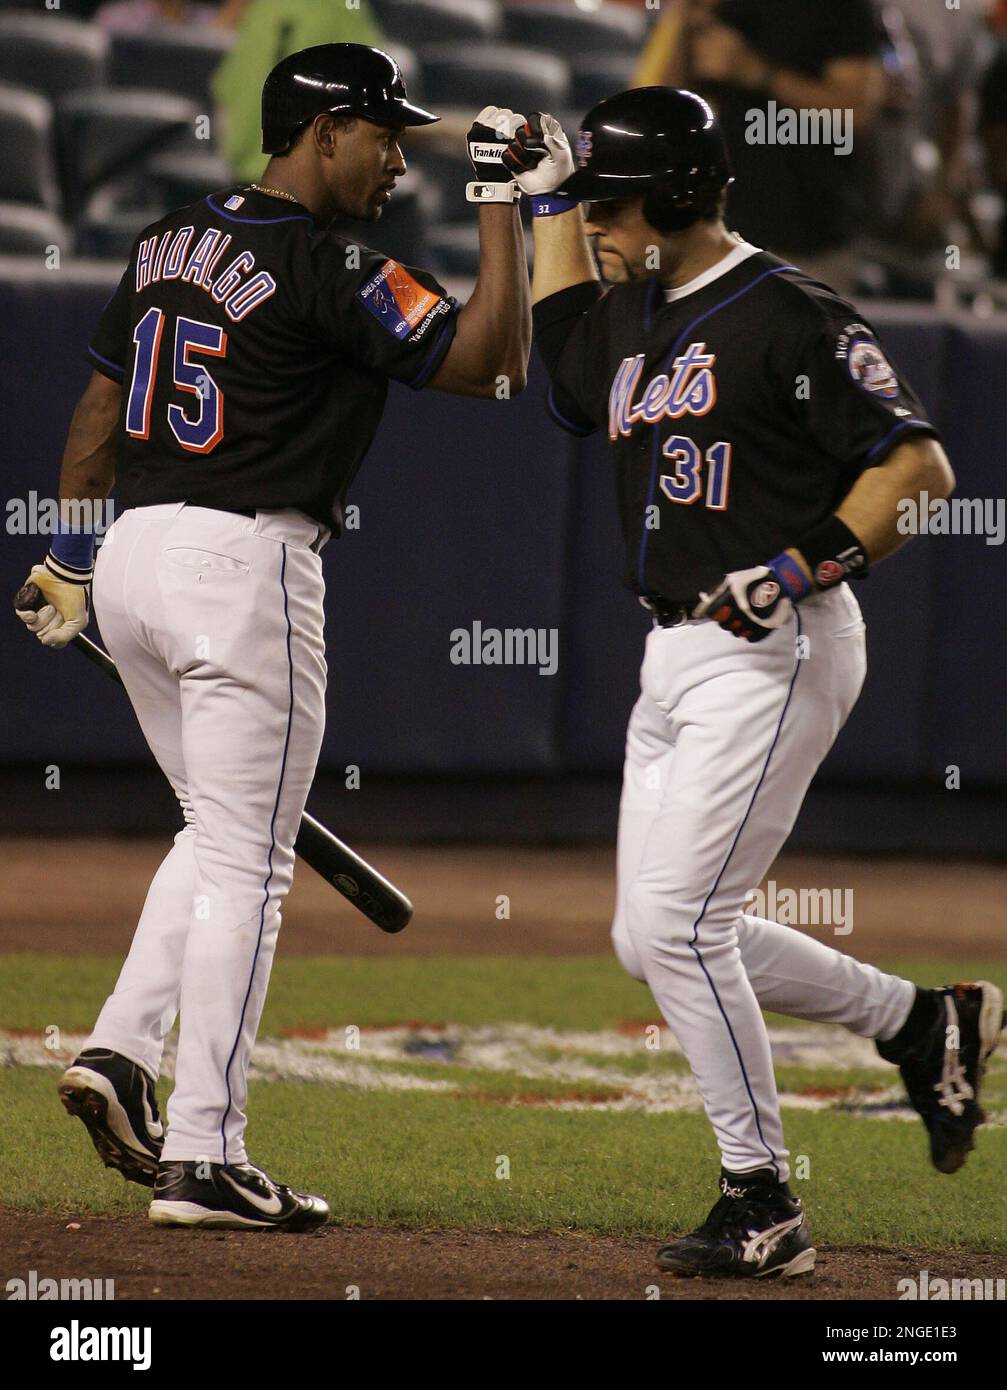 New York Mets' Mike Piazza is congratulated by Richard Hidalgo after  hitting a solo home run against the Florida Marlins during the third  inning, Monday, Aug. 30, 2004 at Shea Stadium in